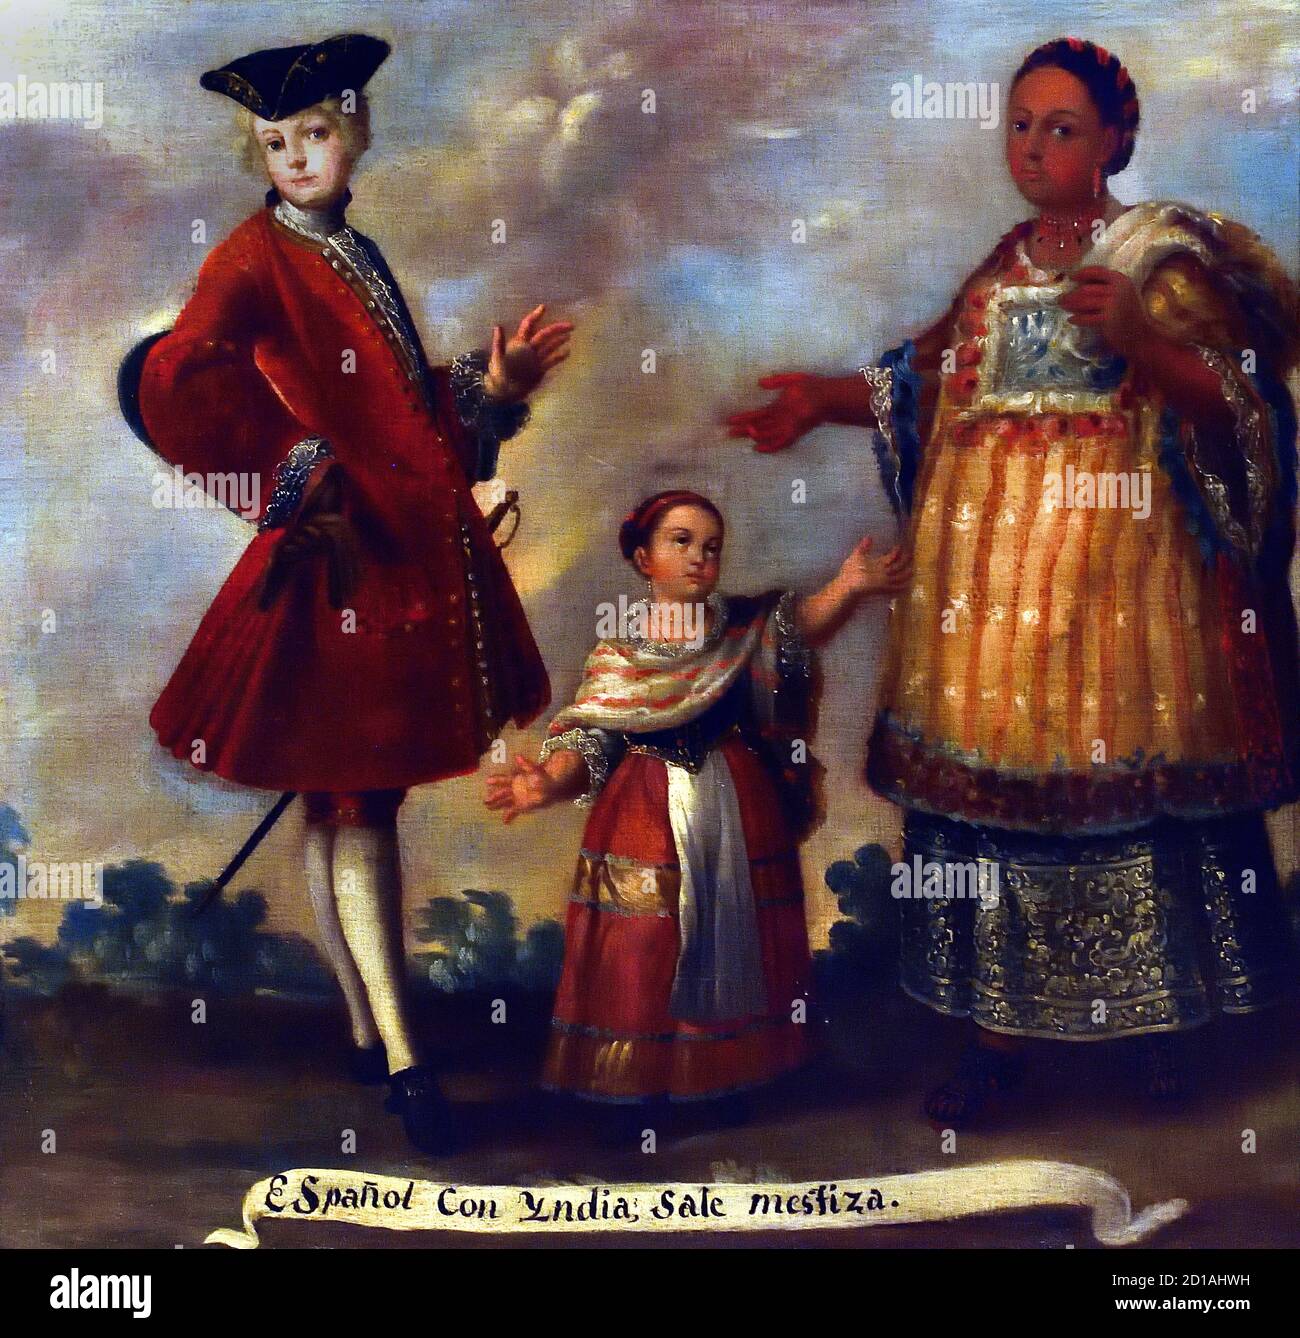 Luis Berrueco,1717-1749 Mexico 18th Century  ( Luis Berrueco comes from a painters' dynasty in Puebla and had a large number of followers) Each of the miscegenation scenes is identified with inscriptions referring to their degree of miscegenation based on indigenous, European and African ethnic tribes, characteristic of a pictorial genre developed in the Viceroyalty of New Spain during the 18th century. . This genre is known as 'caste painting' Stock Photo